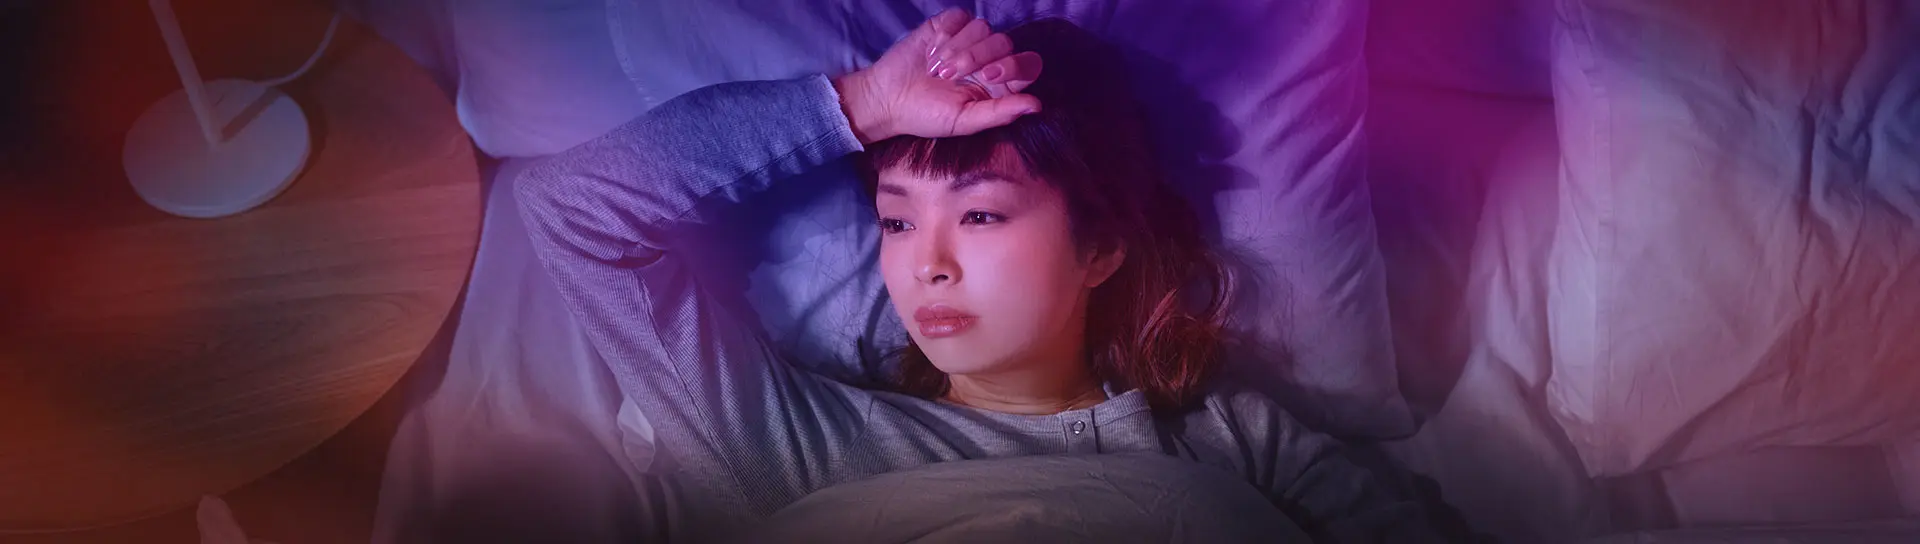 Sleepless Asian woman lying in bed at night.